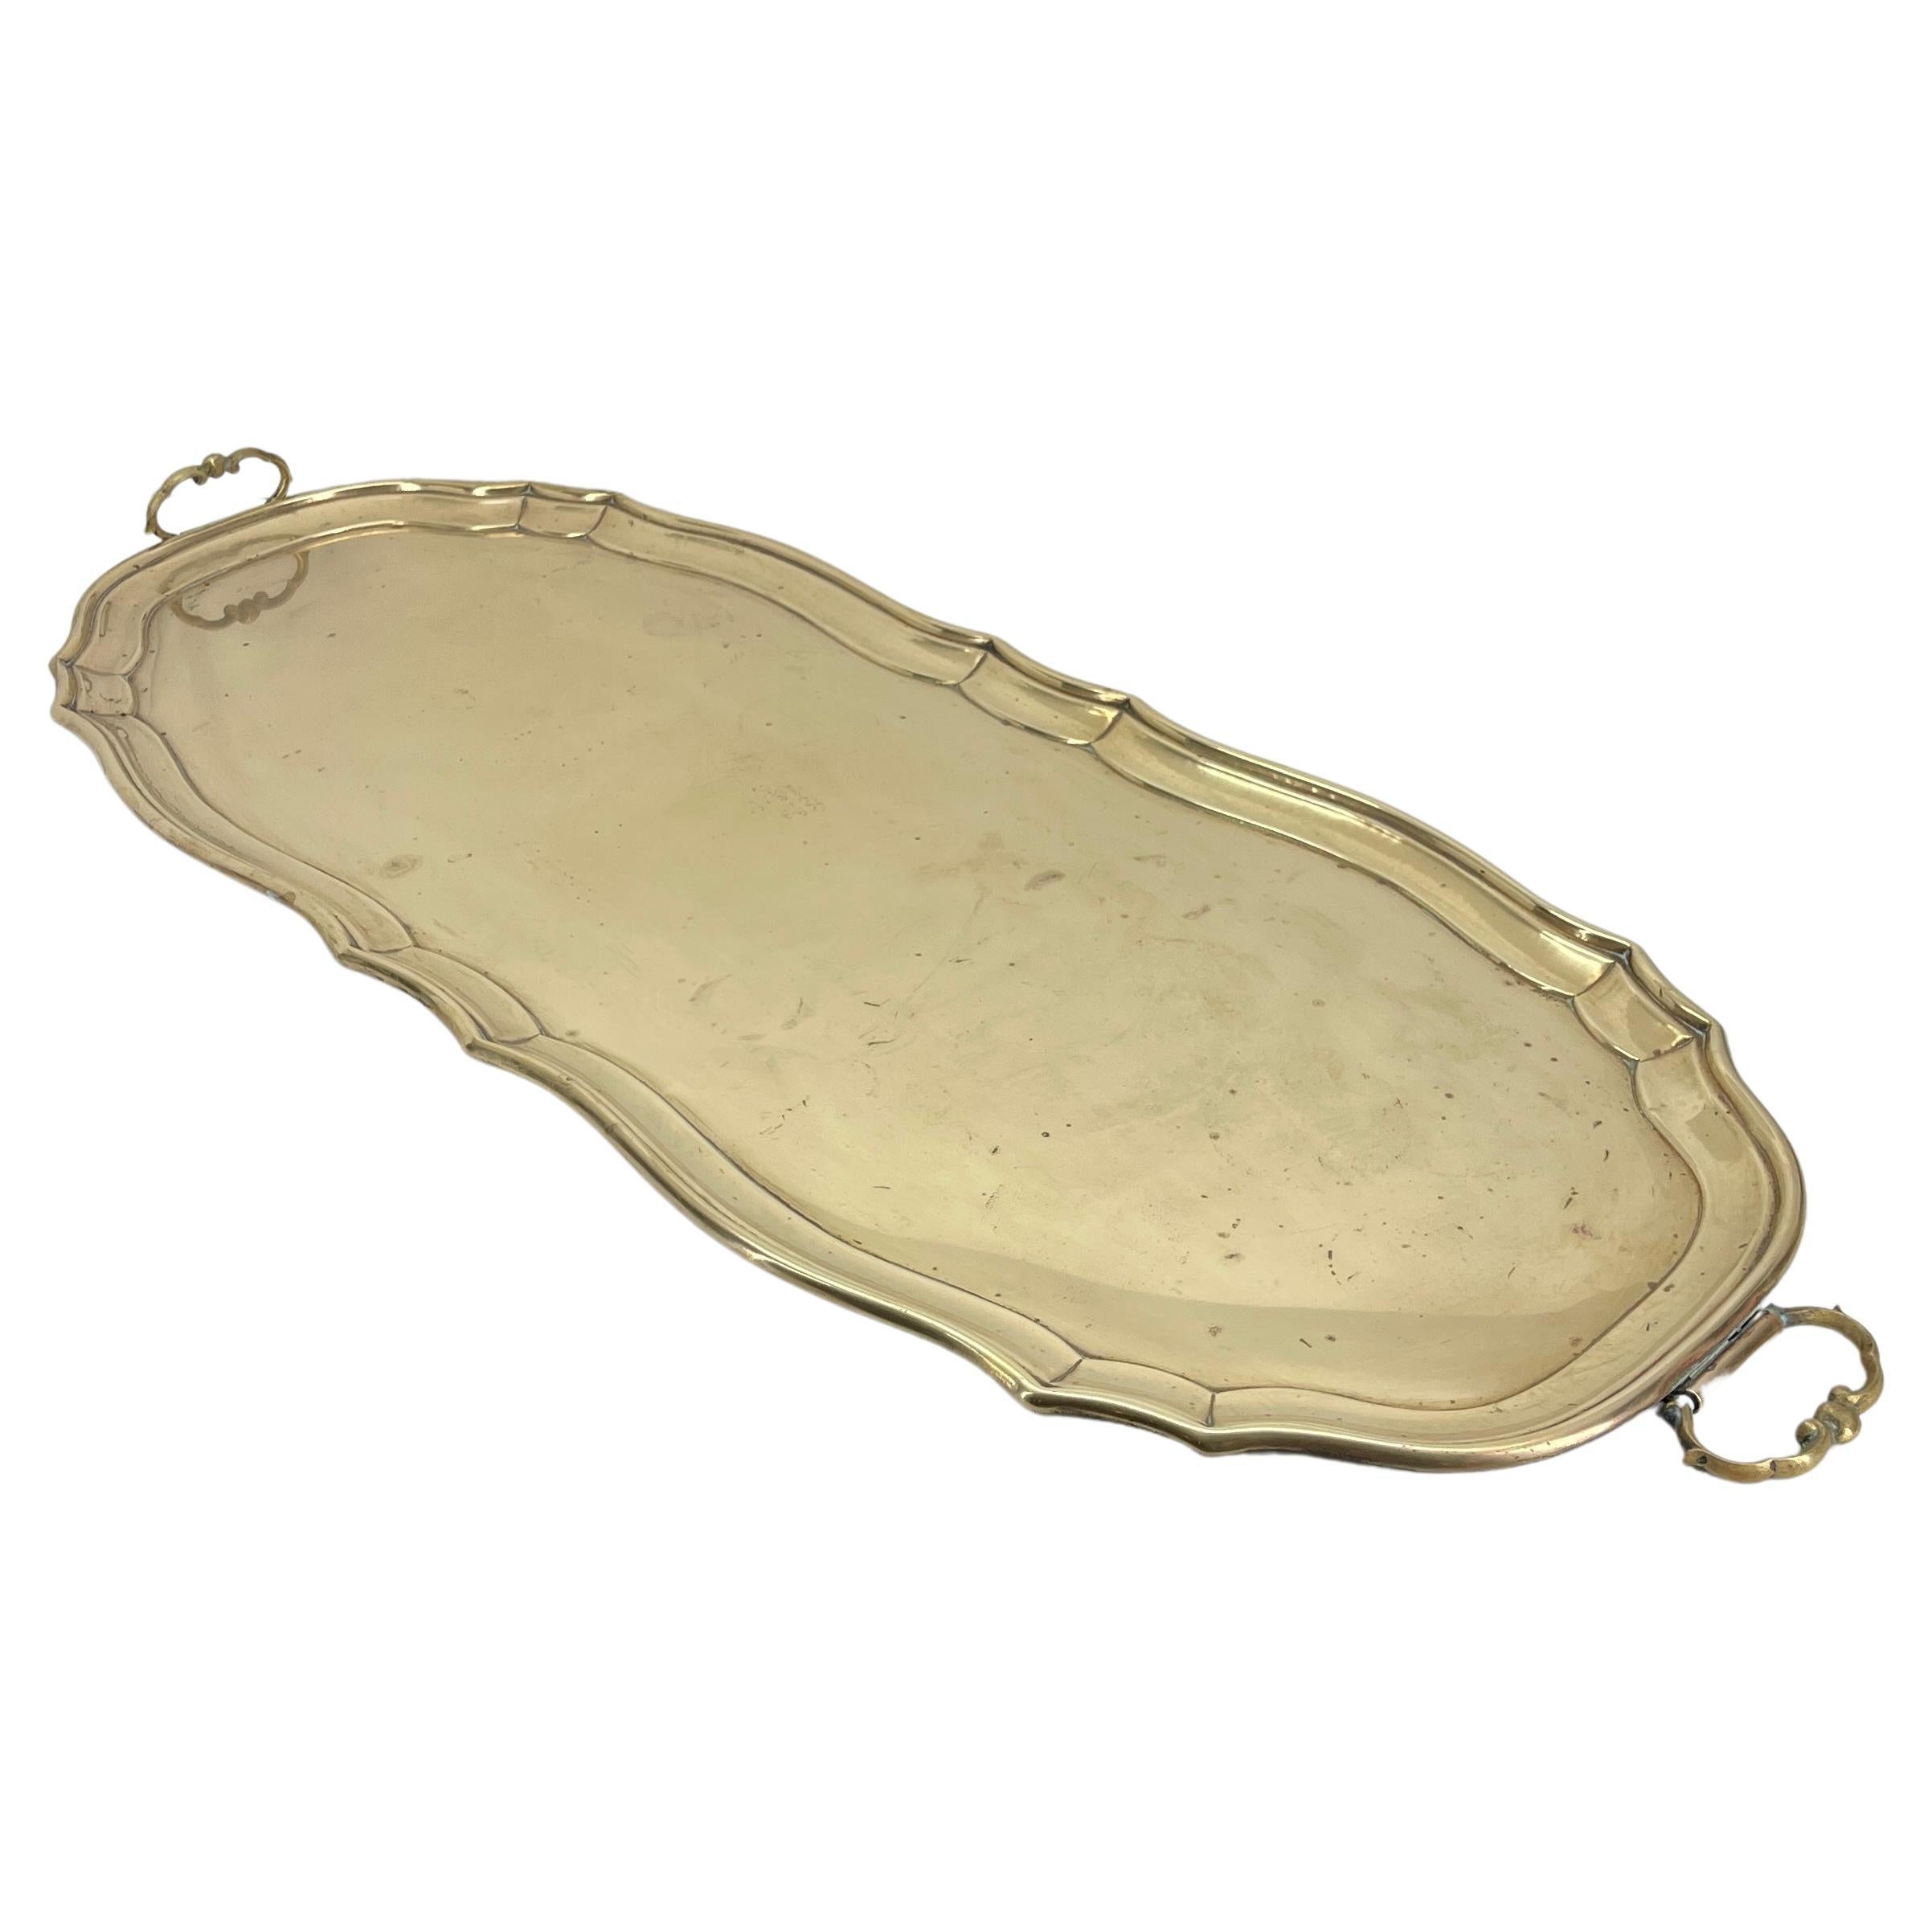 Long narrow heavy brass tray with bronze handles, marked made in Germany. 
This amazing tray is quite long and can easily be used for as a centerpiece on a dining table. The tray has been used by legendary New York City based interior designer and